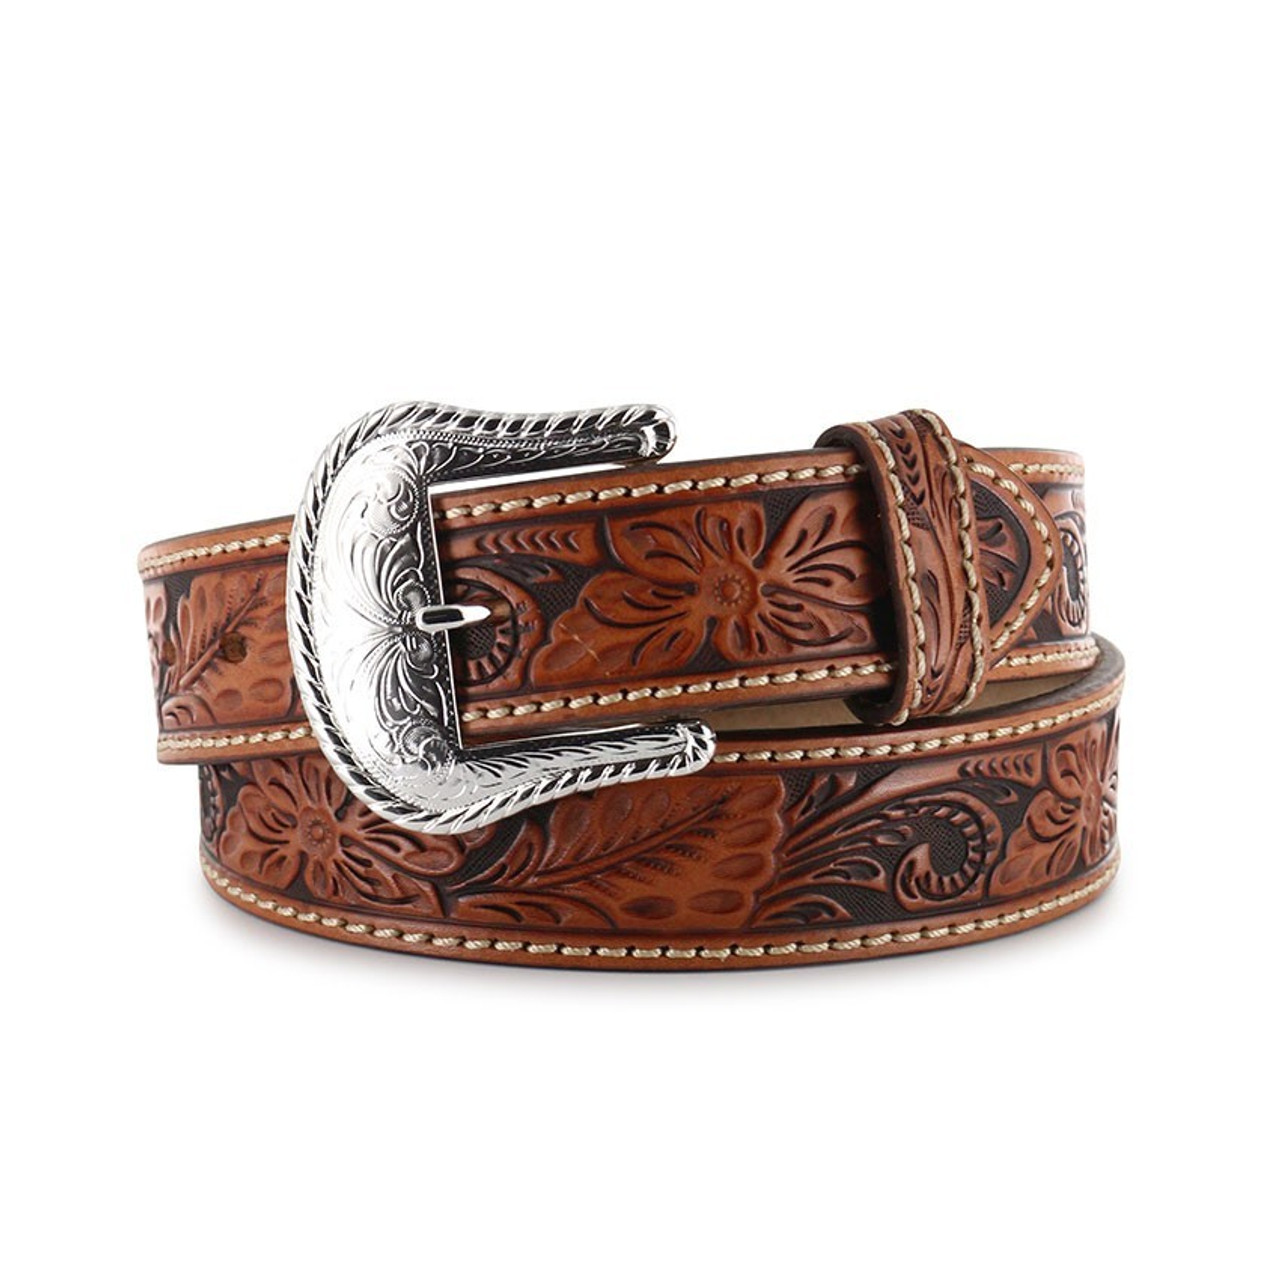 Tony LamaÂ® Men's Brown Floral Hand Tooled Leather Belt